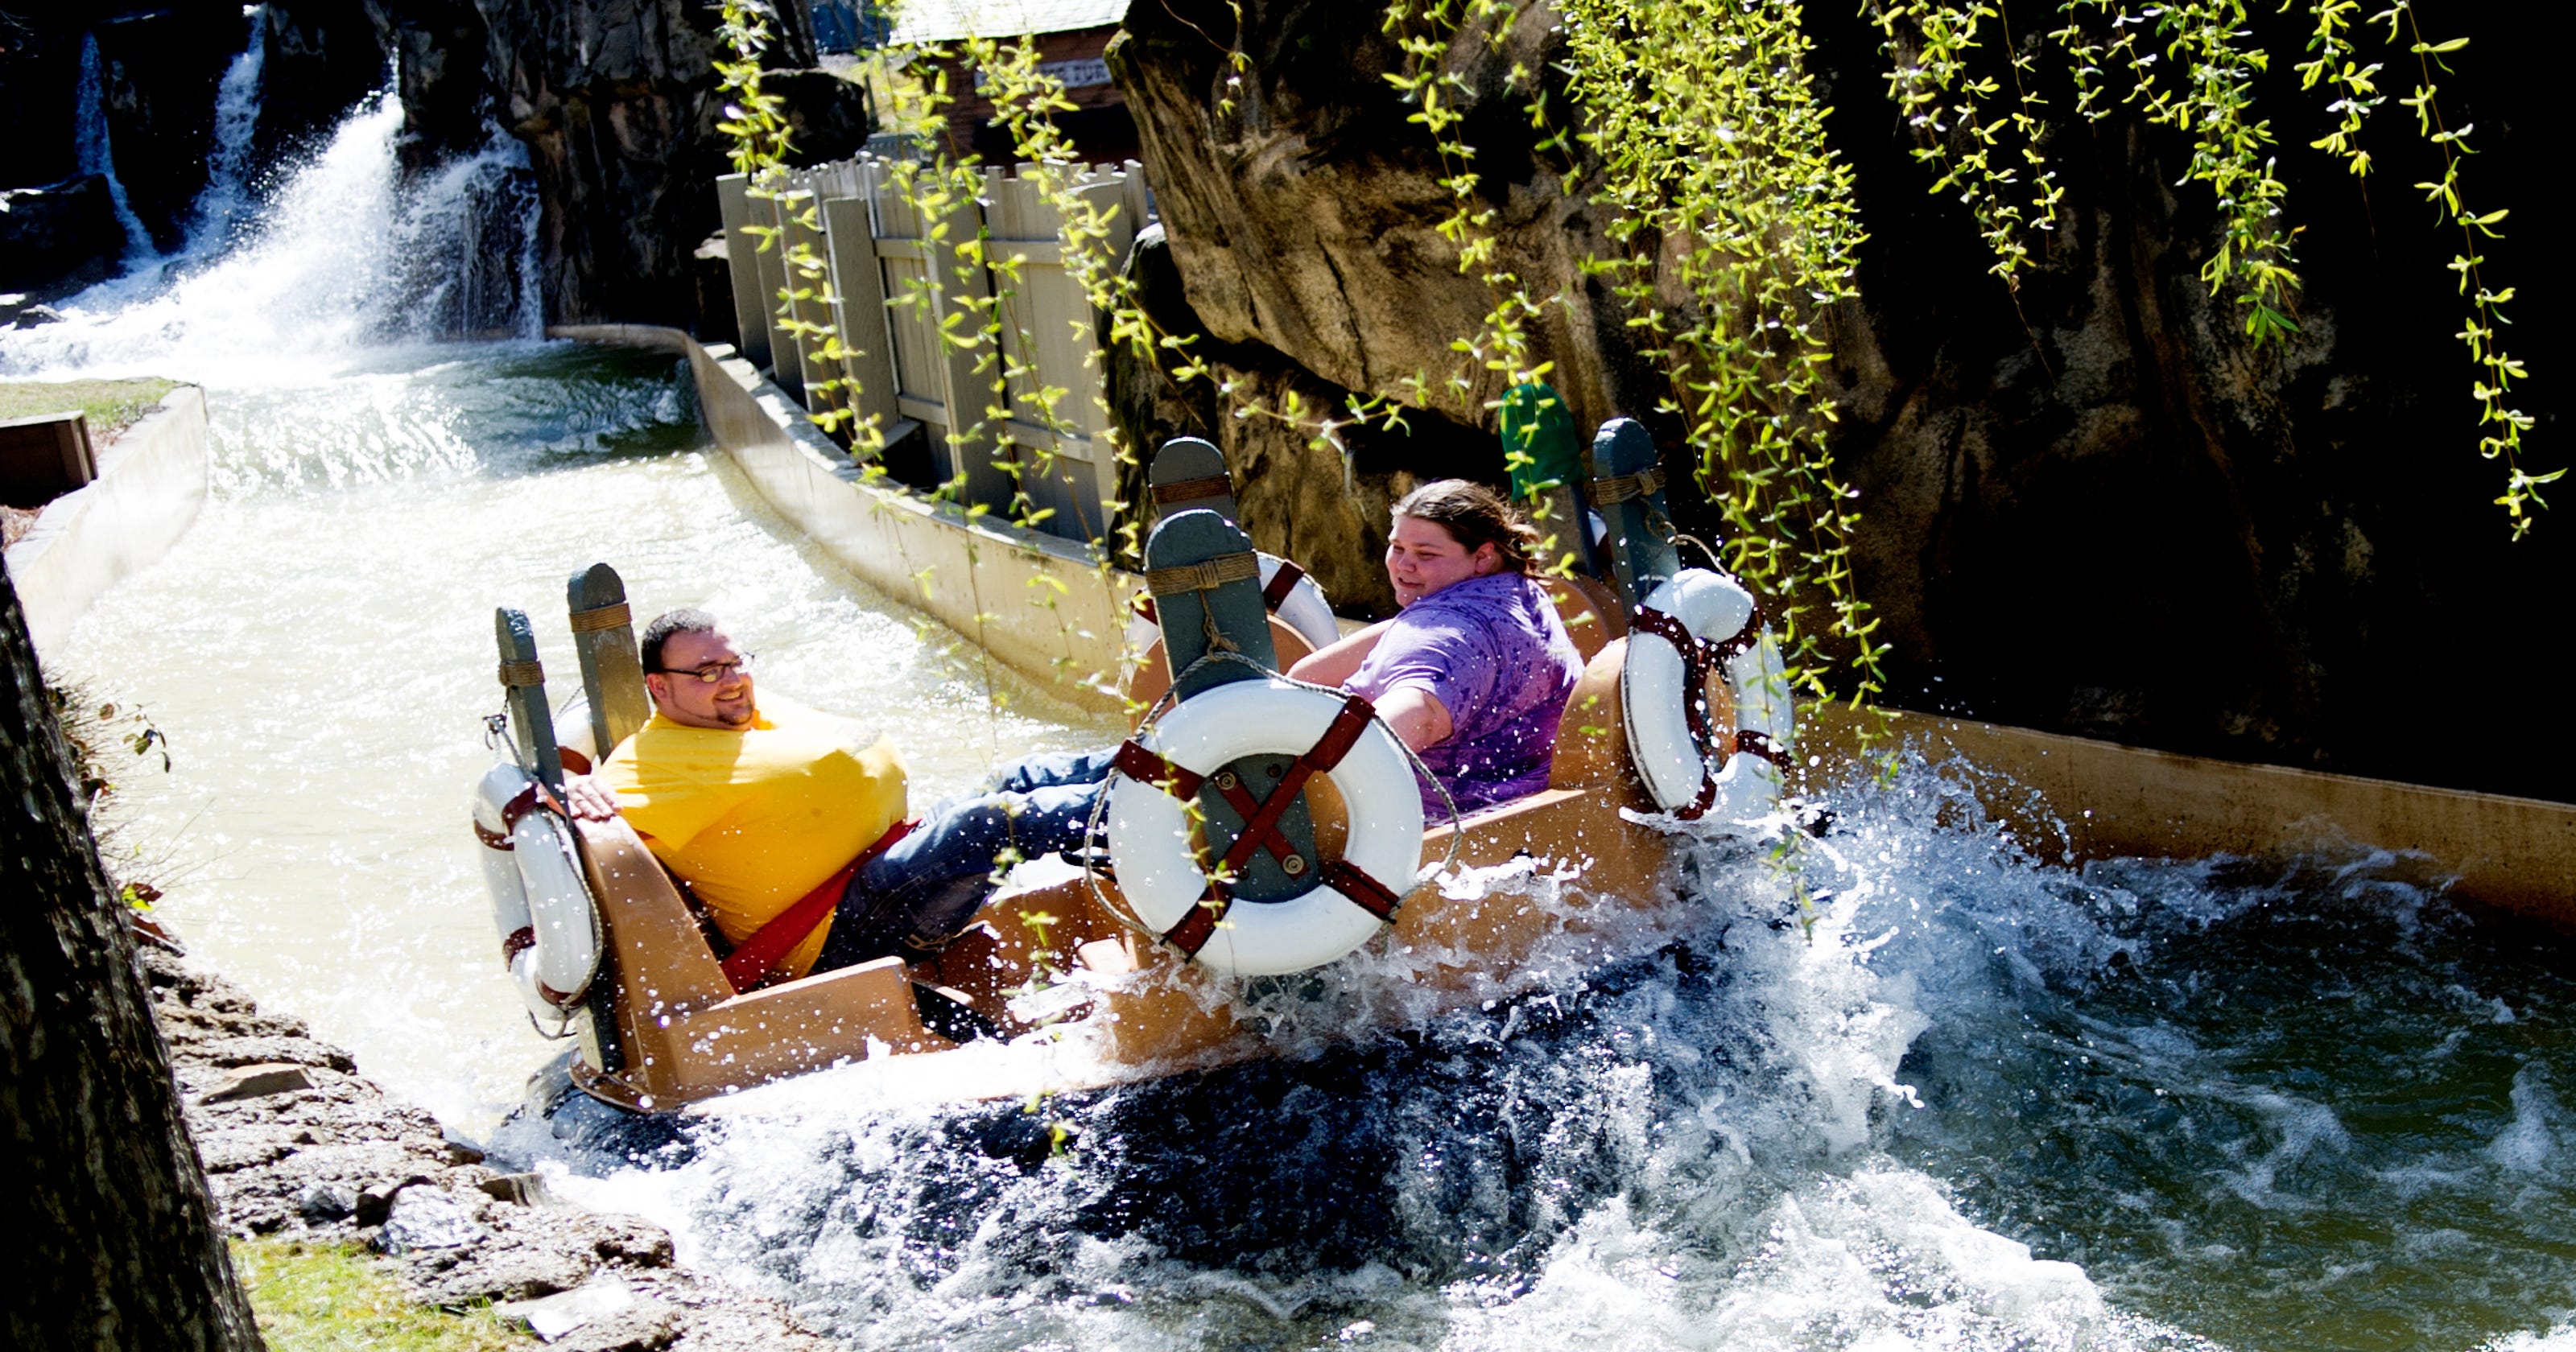 Dollywood opens this weekend Tips on tickets, rides, attractions, food